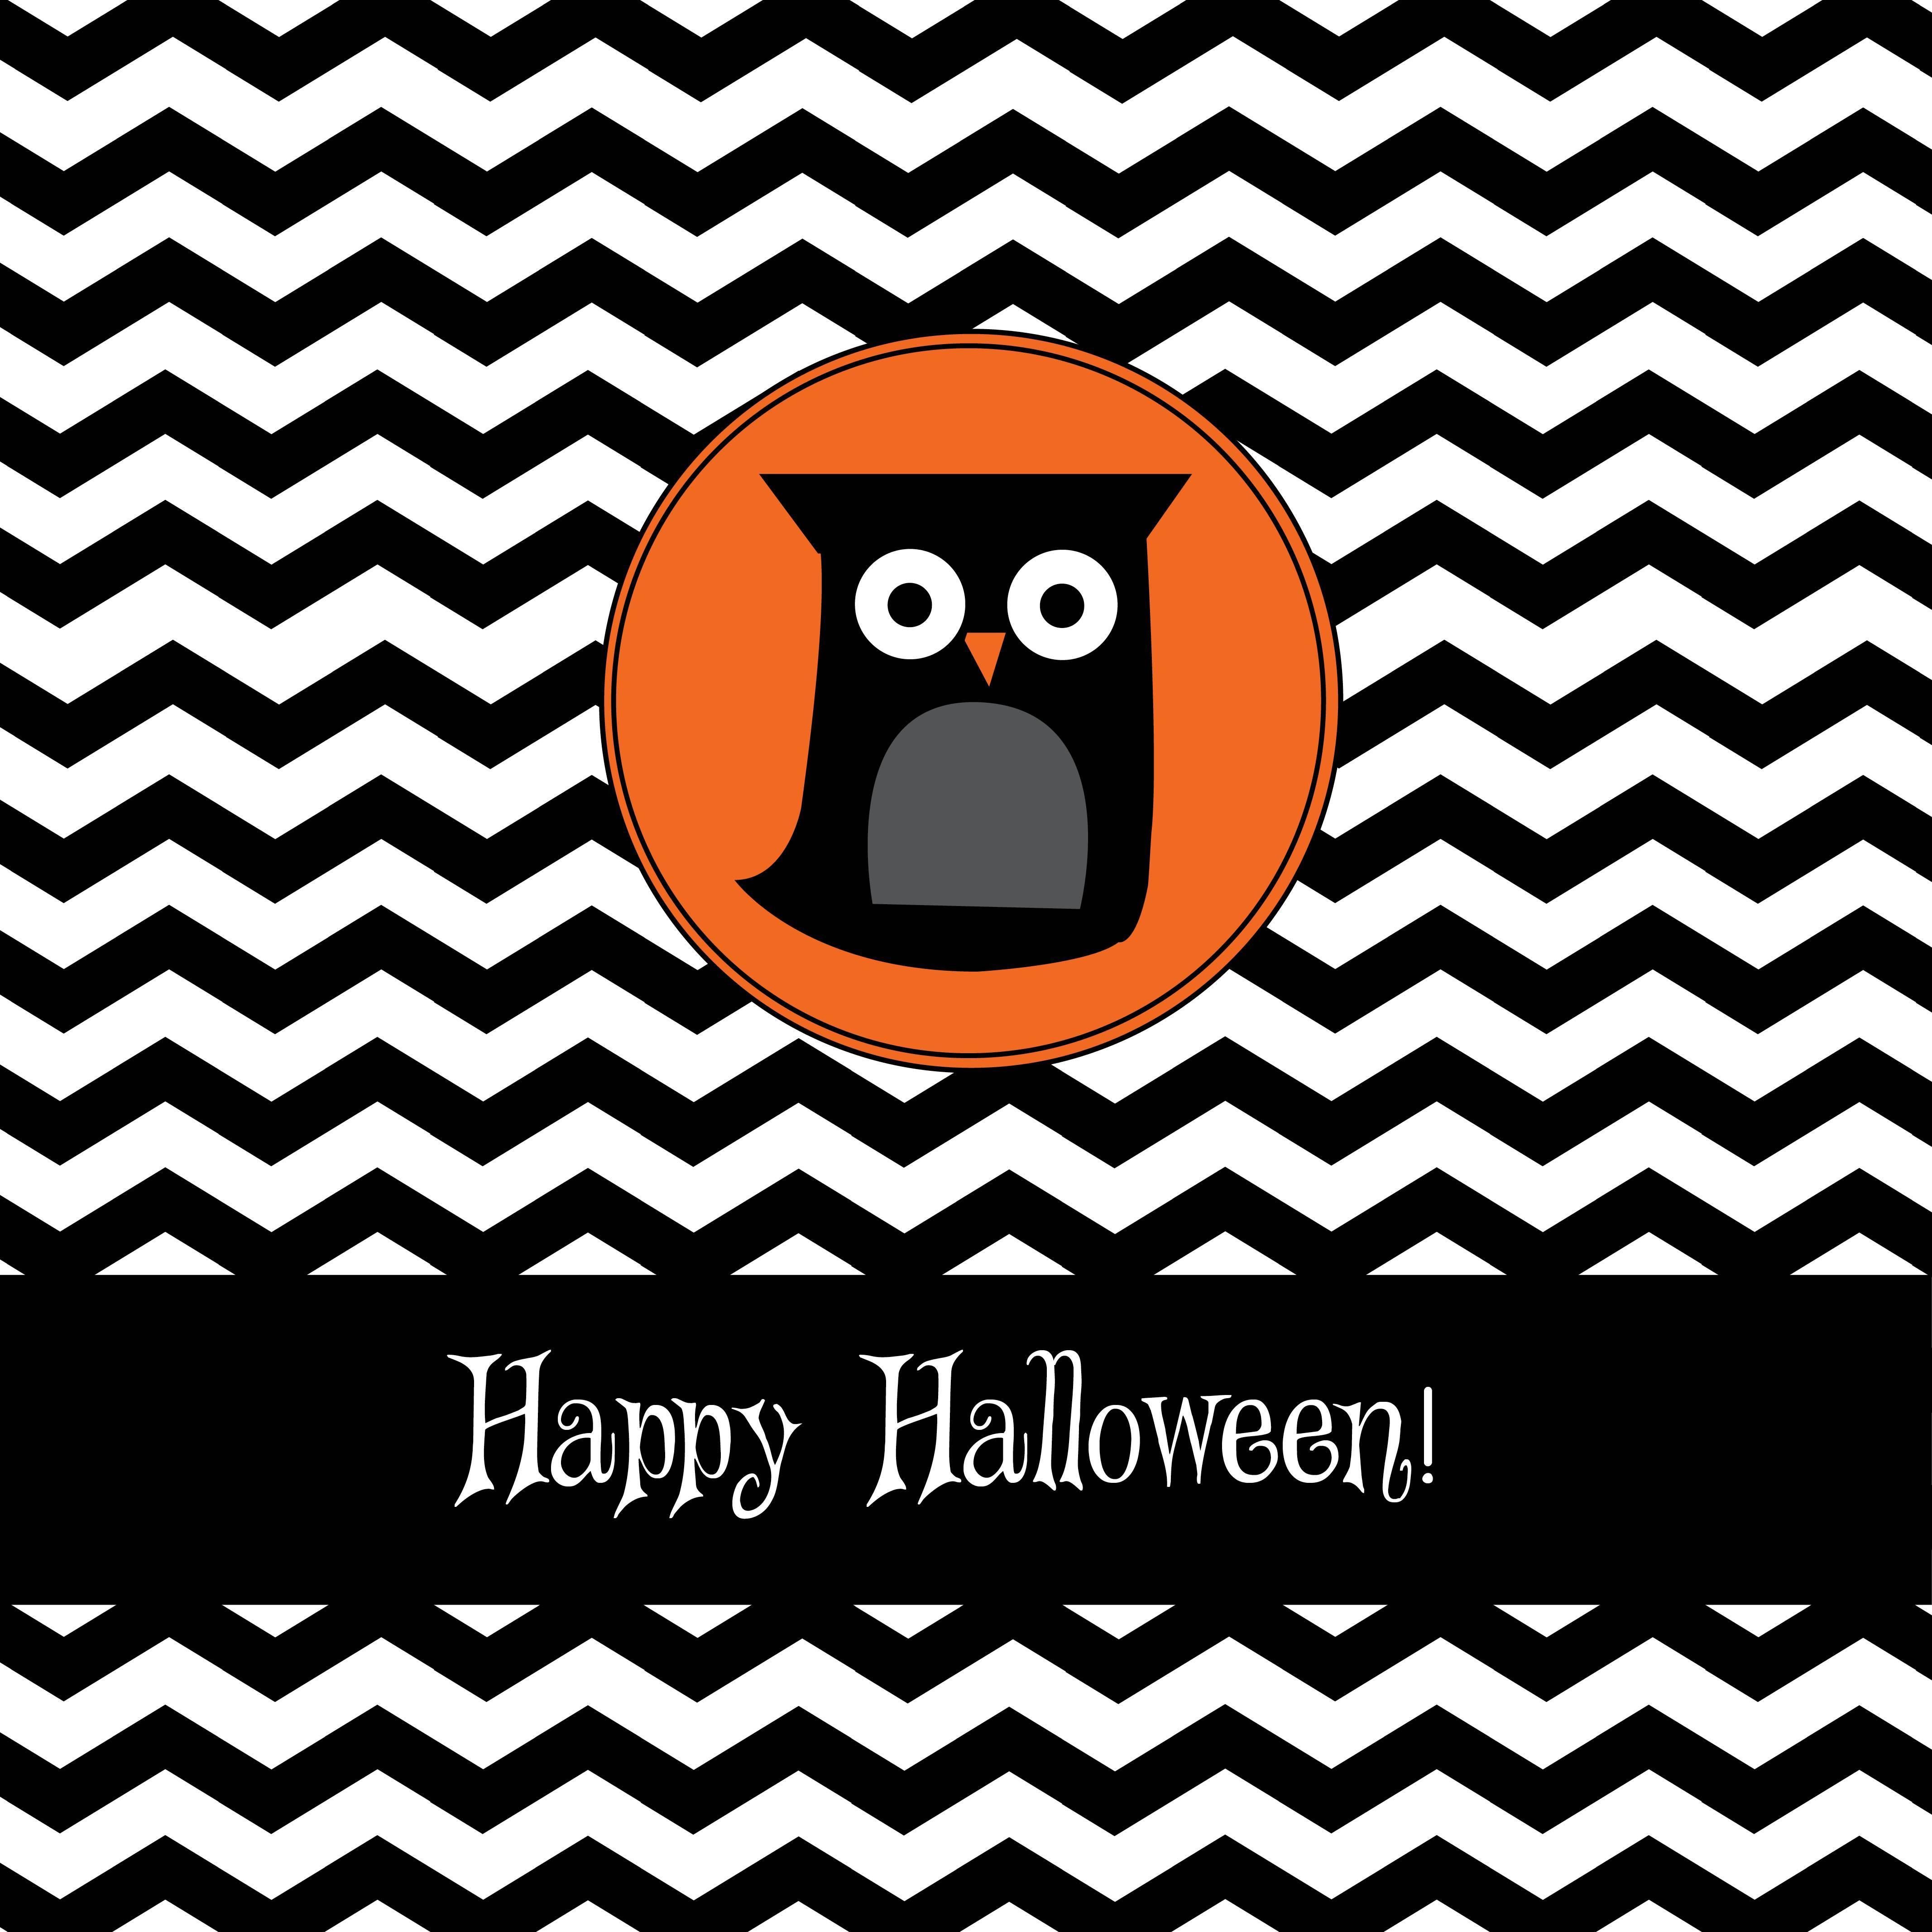 Cute Halloween Wallpaper Group , Download for free